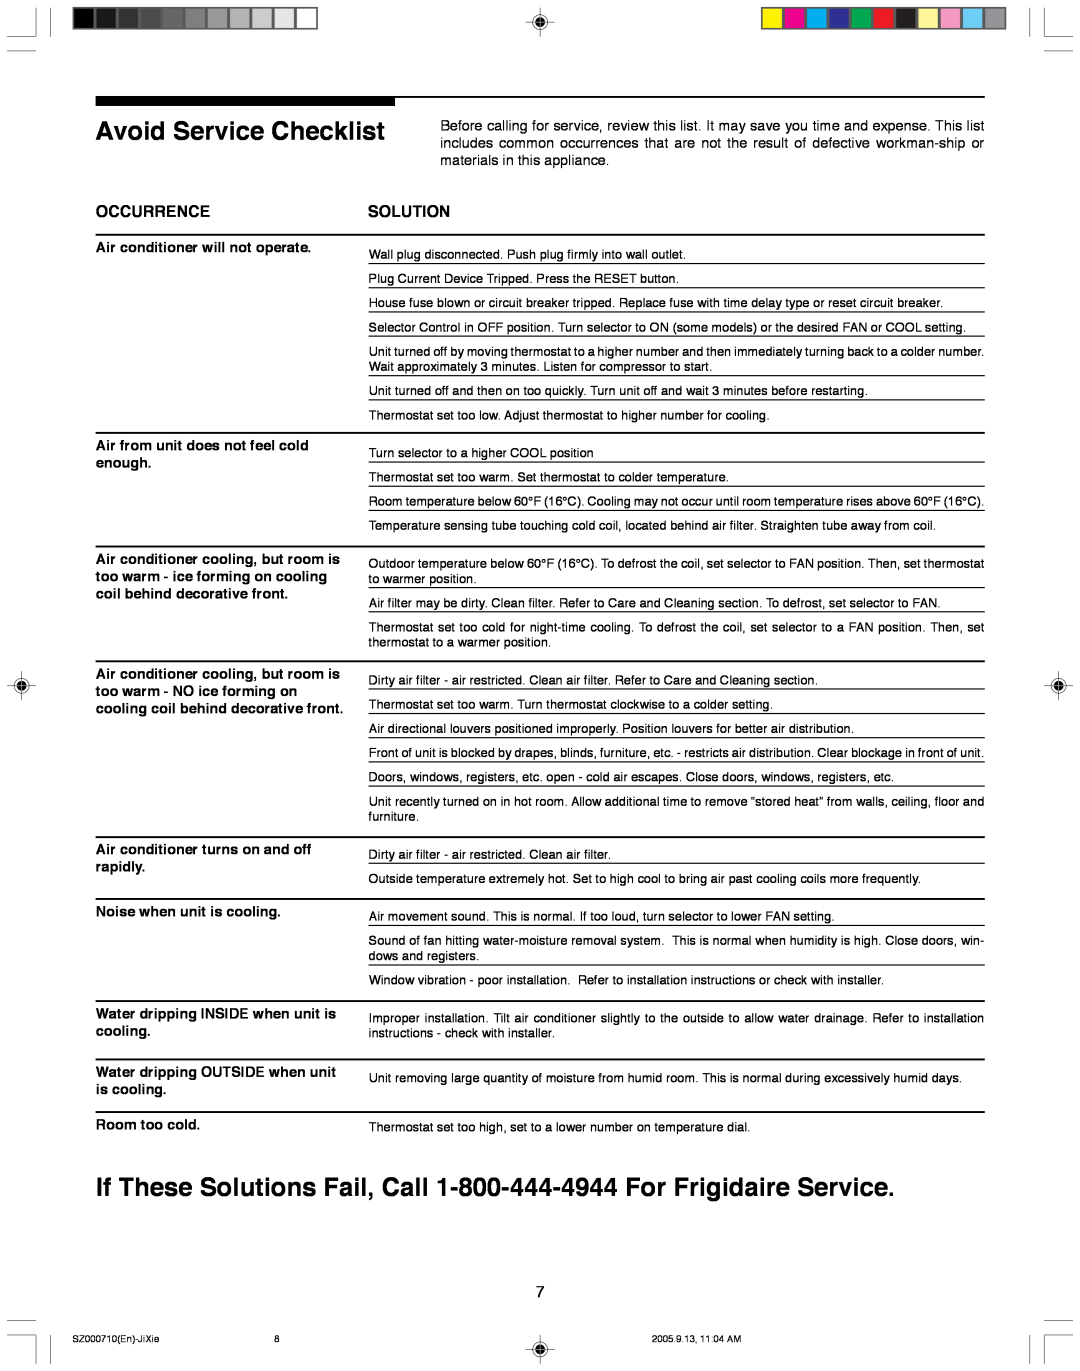 Frigidaire 220211A177 manual Avoid Service Checklist, If These Solutions Fail, Call 1-800-444-4944 For Frigidaire Service 